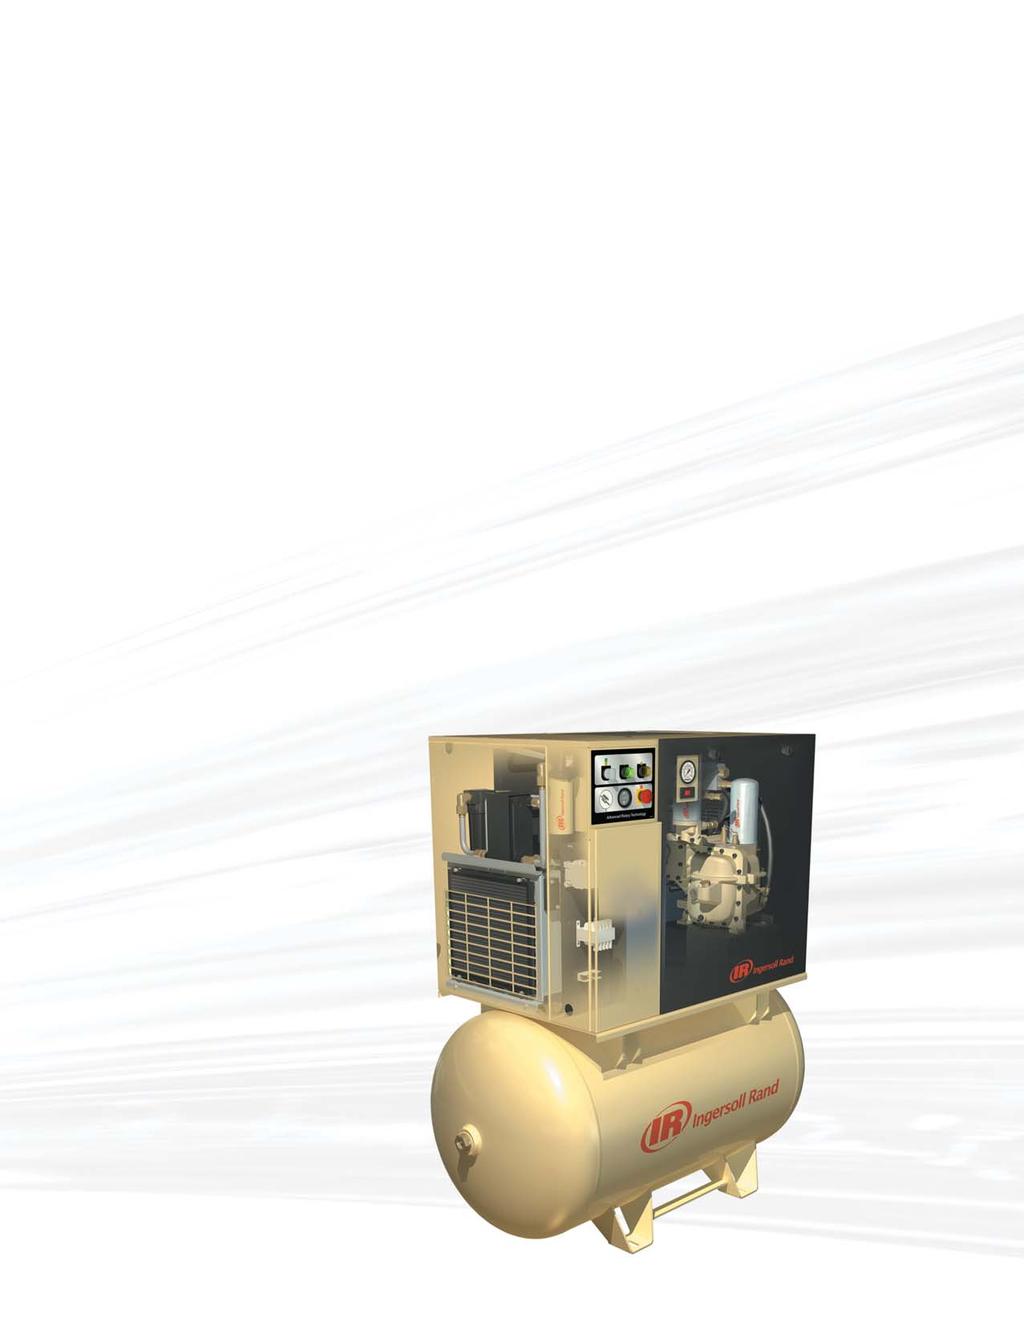 Exceptional Value Ultimate Reliability Maximum Uptime Ingersoll Rand is so confident in the performance of the UP-Series, that we ve extended the warranty to five years.